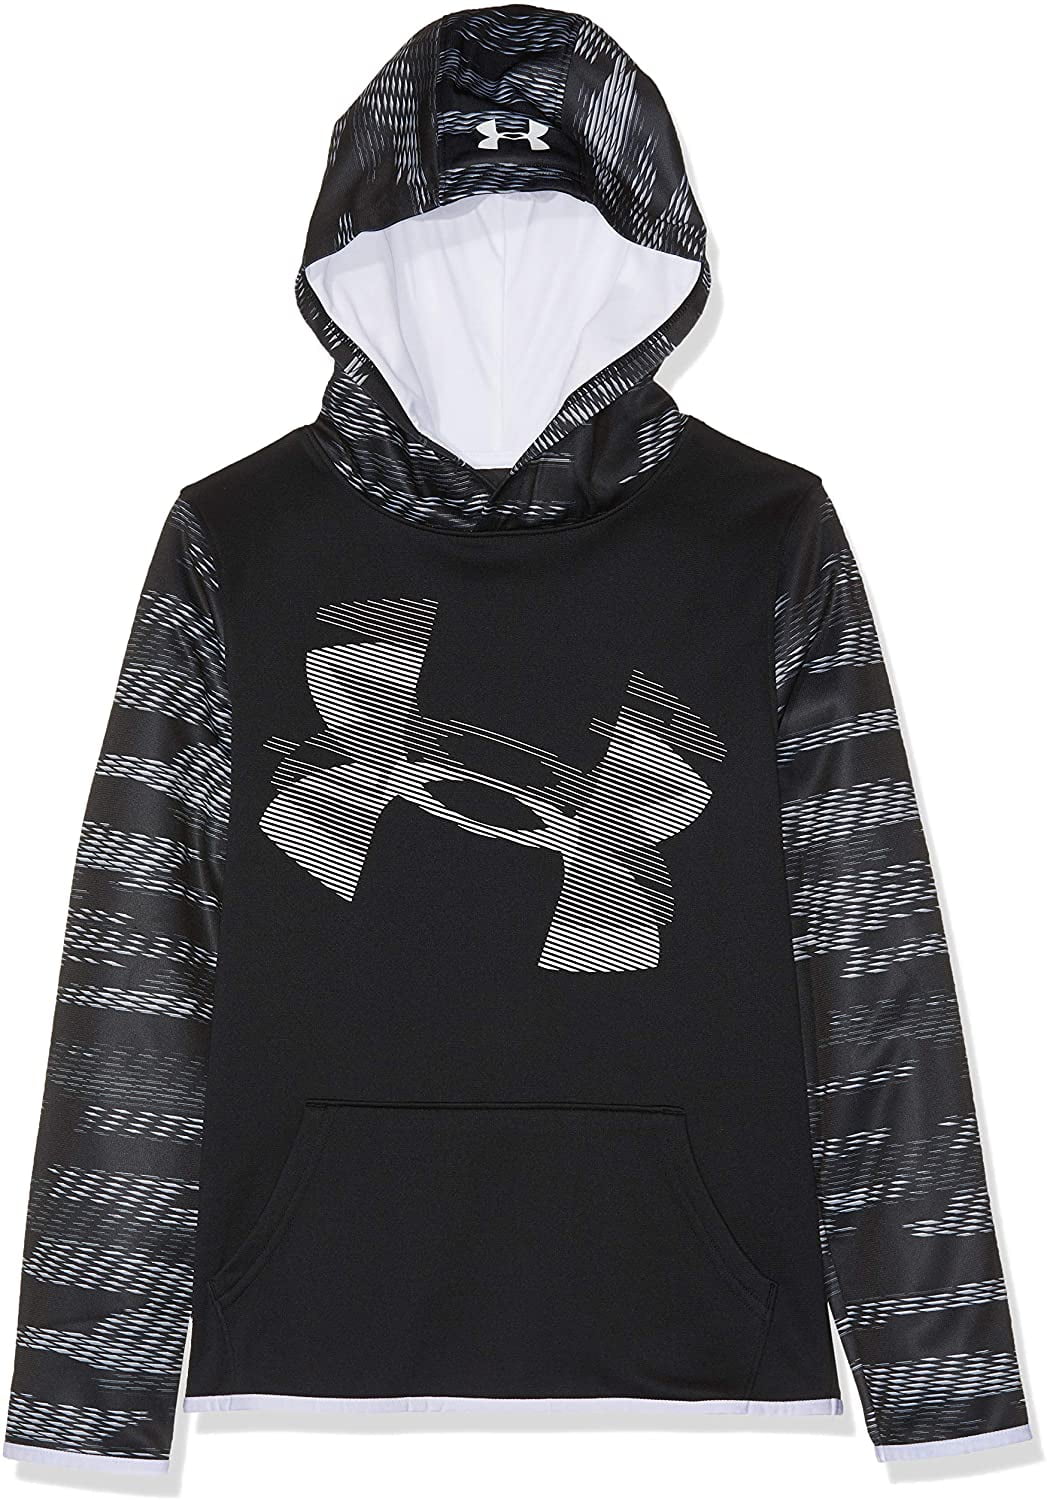 under armour youth large hoodie